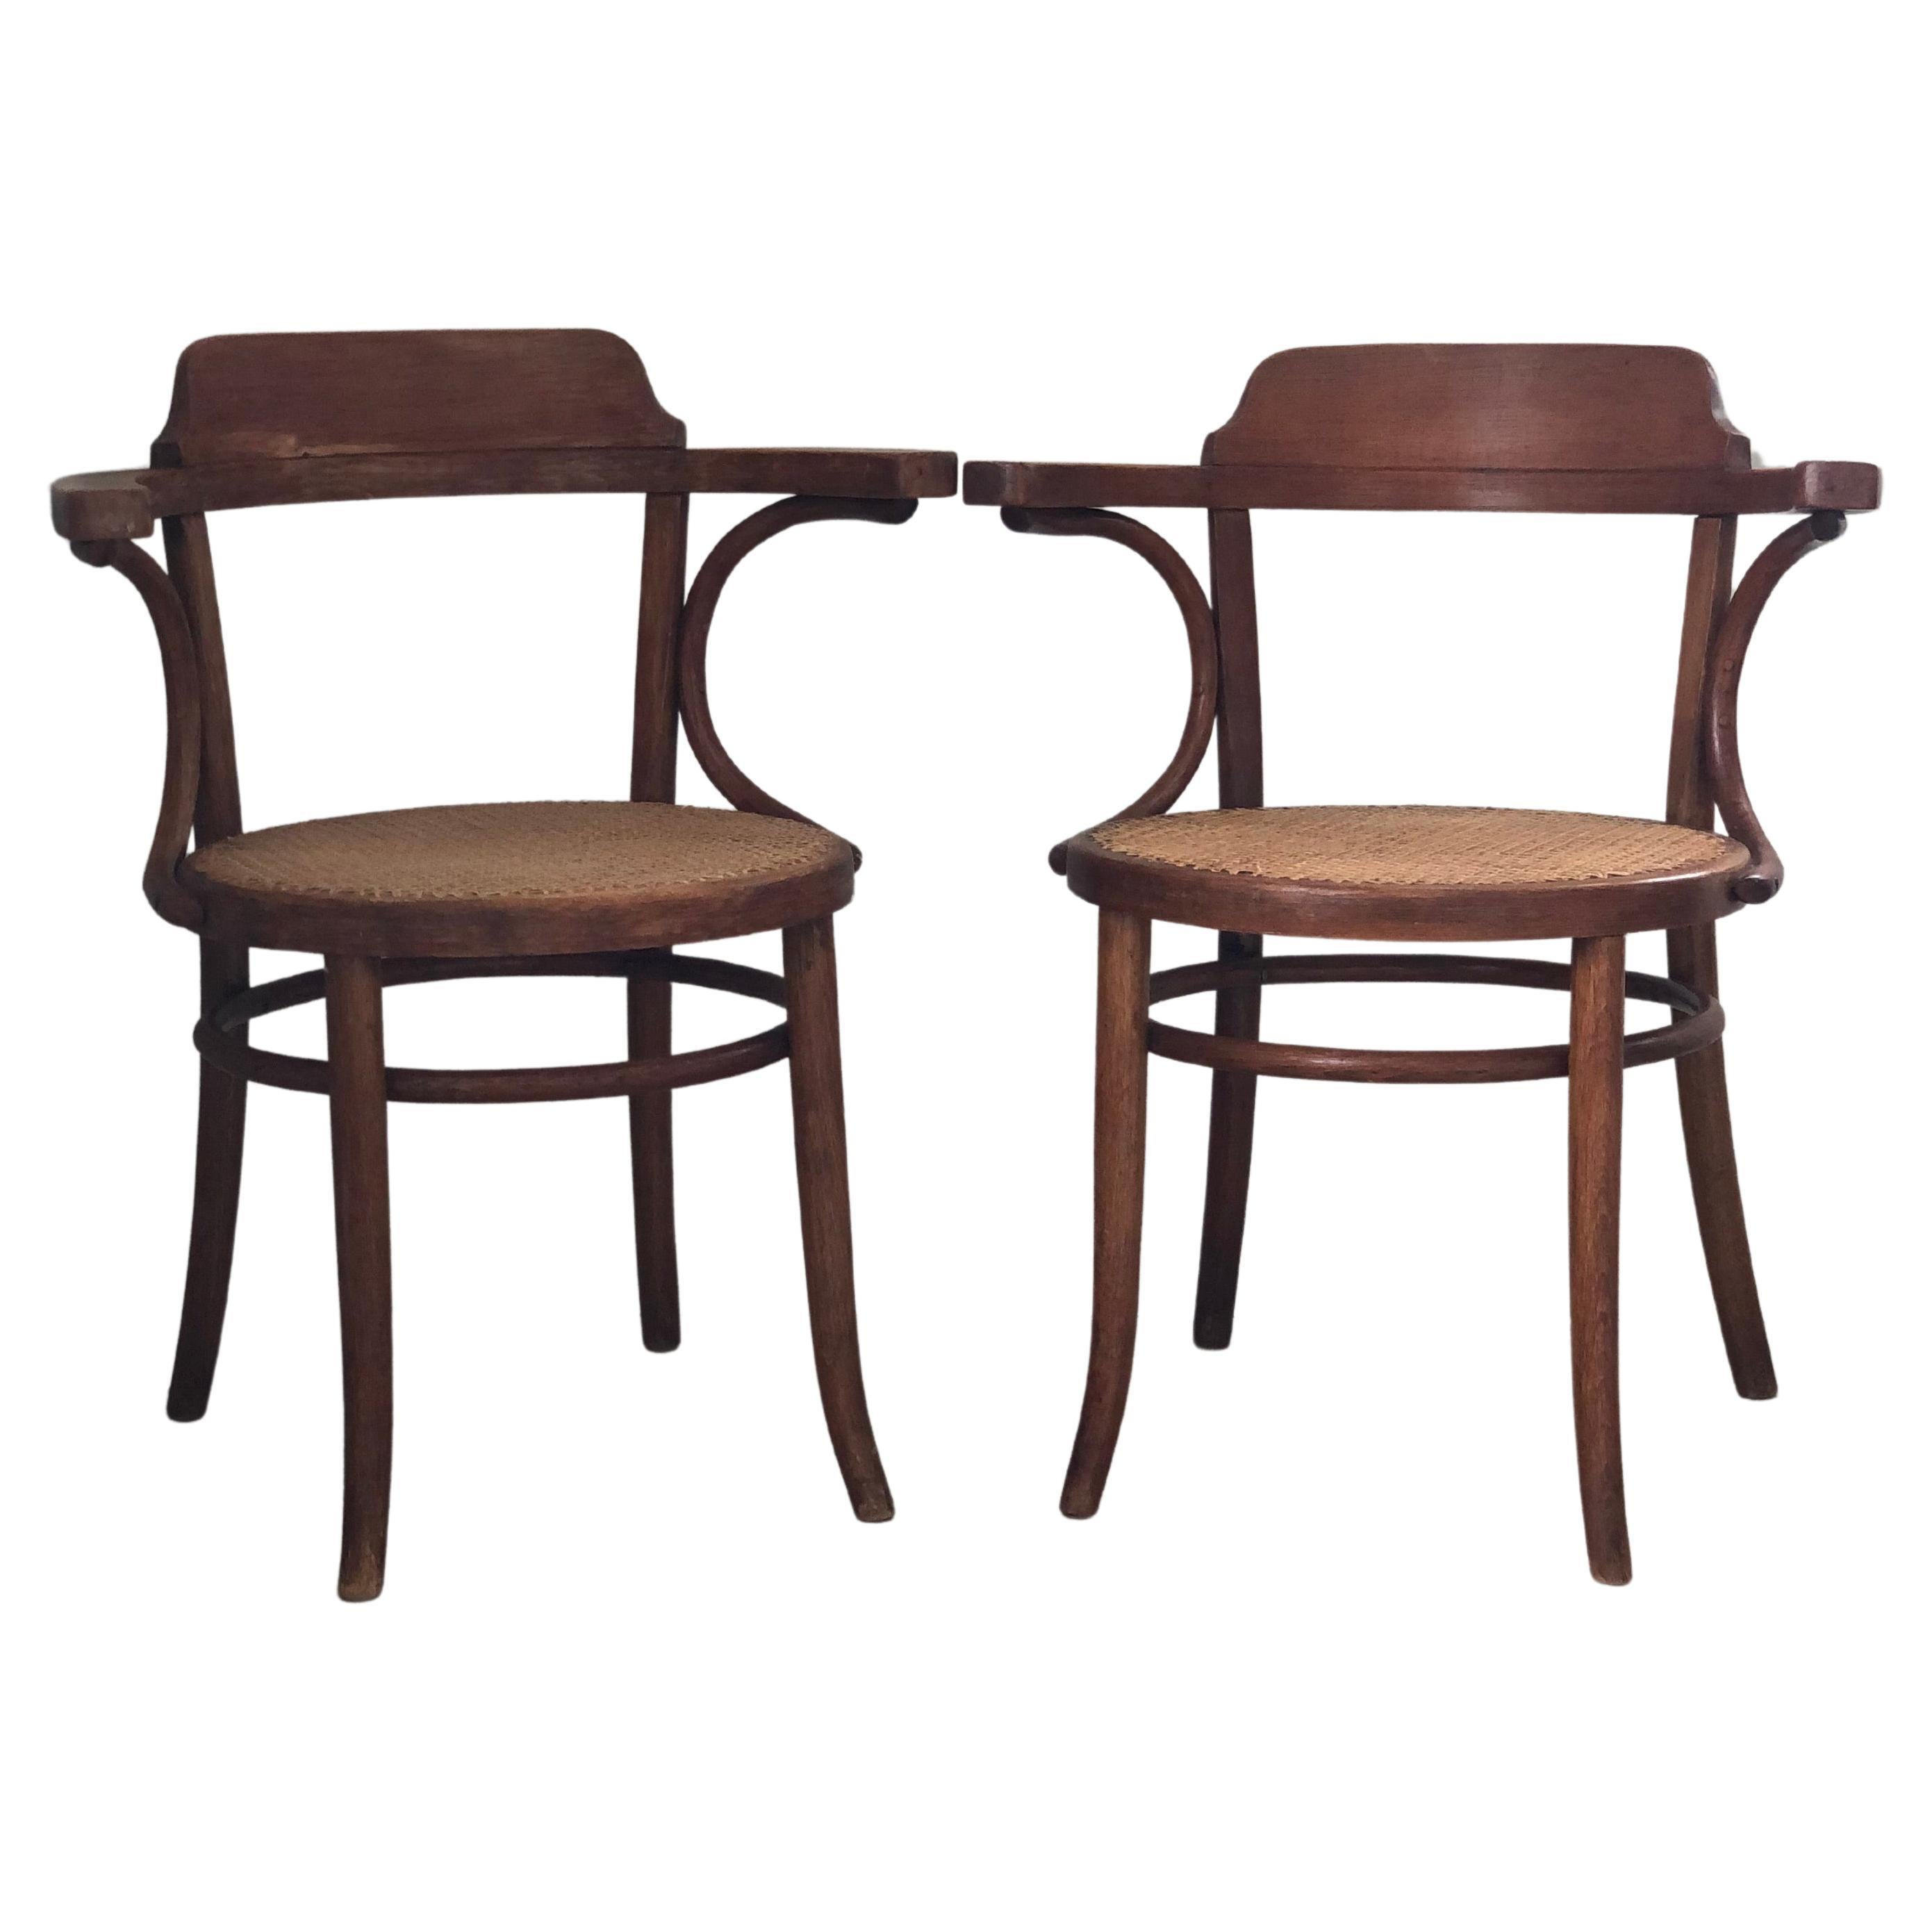 A Pair of Mid Century Thonet Dining Chair Bentwood with Cane 1950s